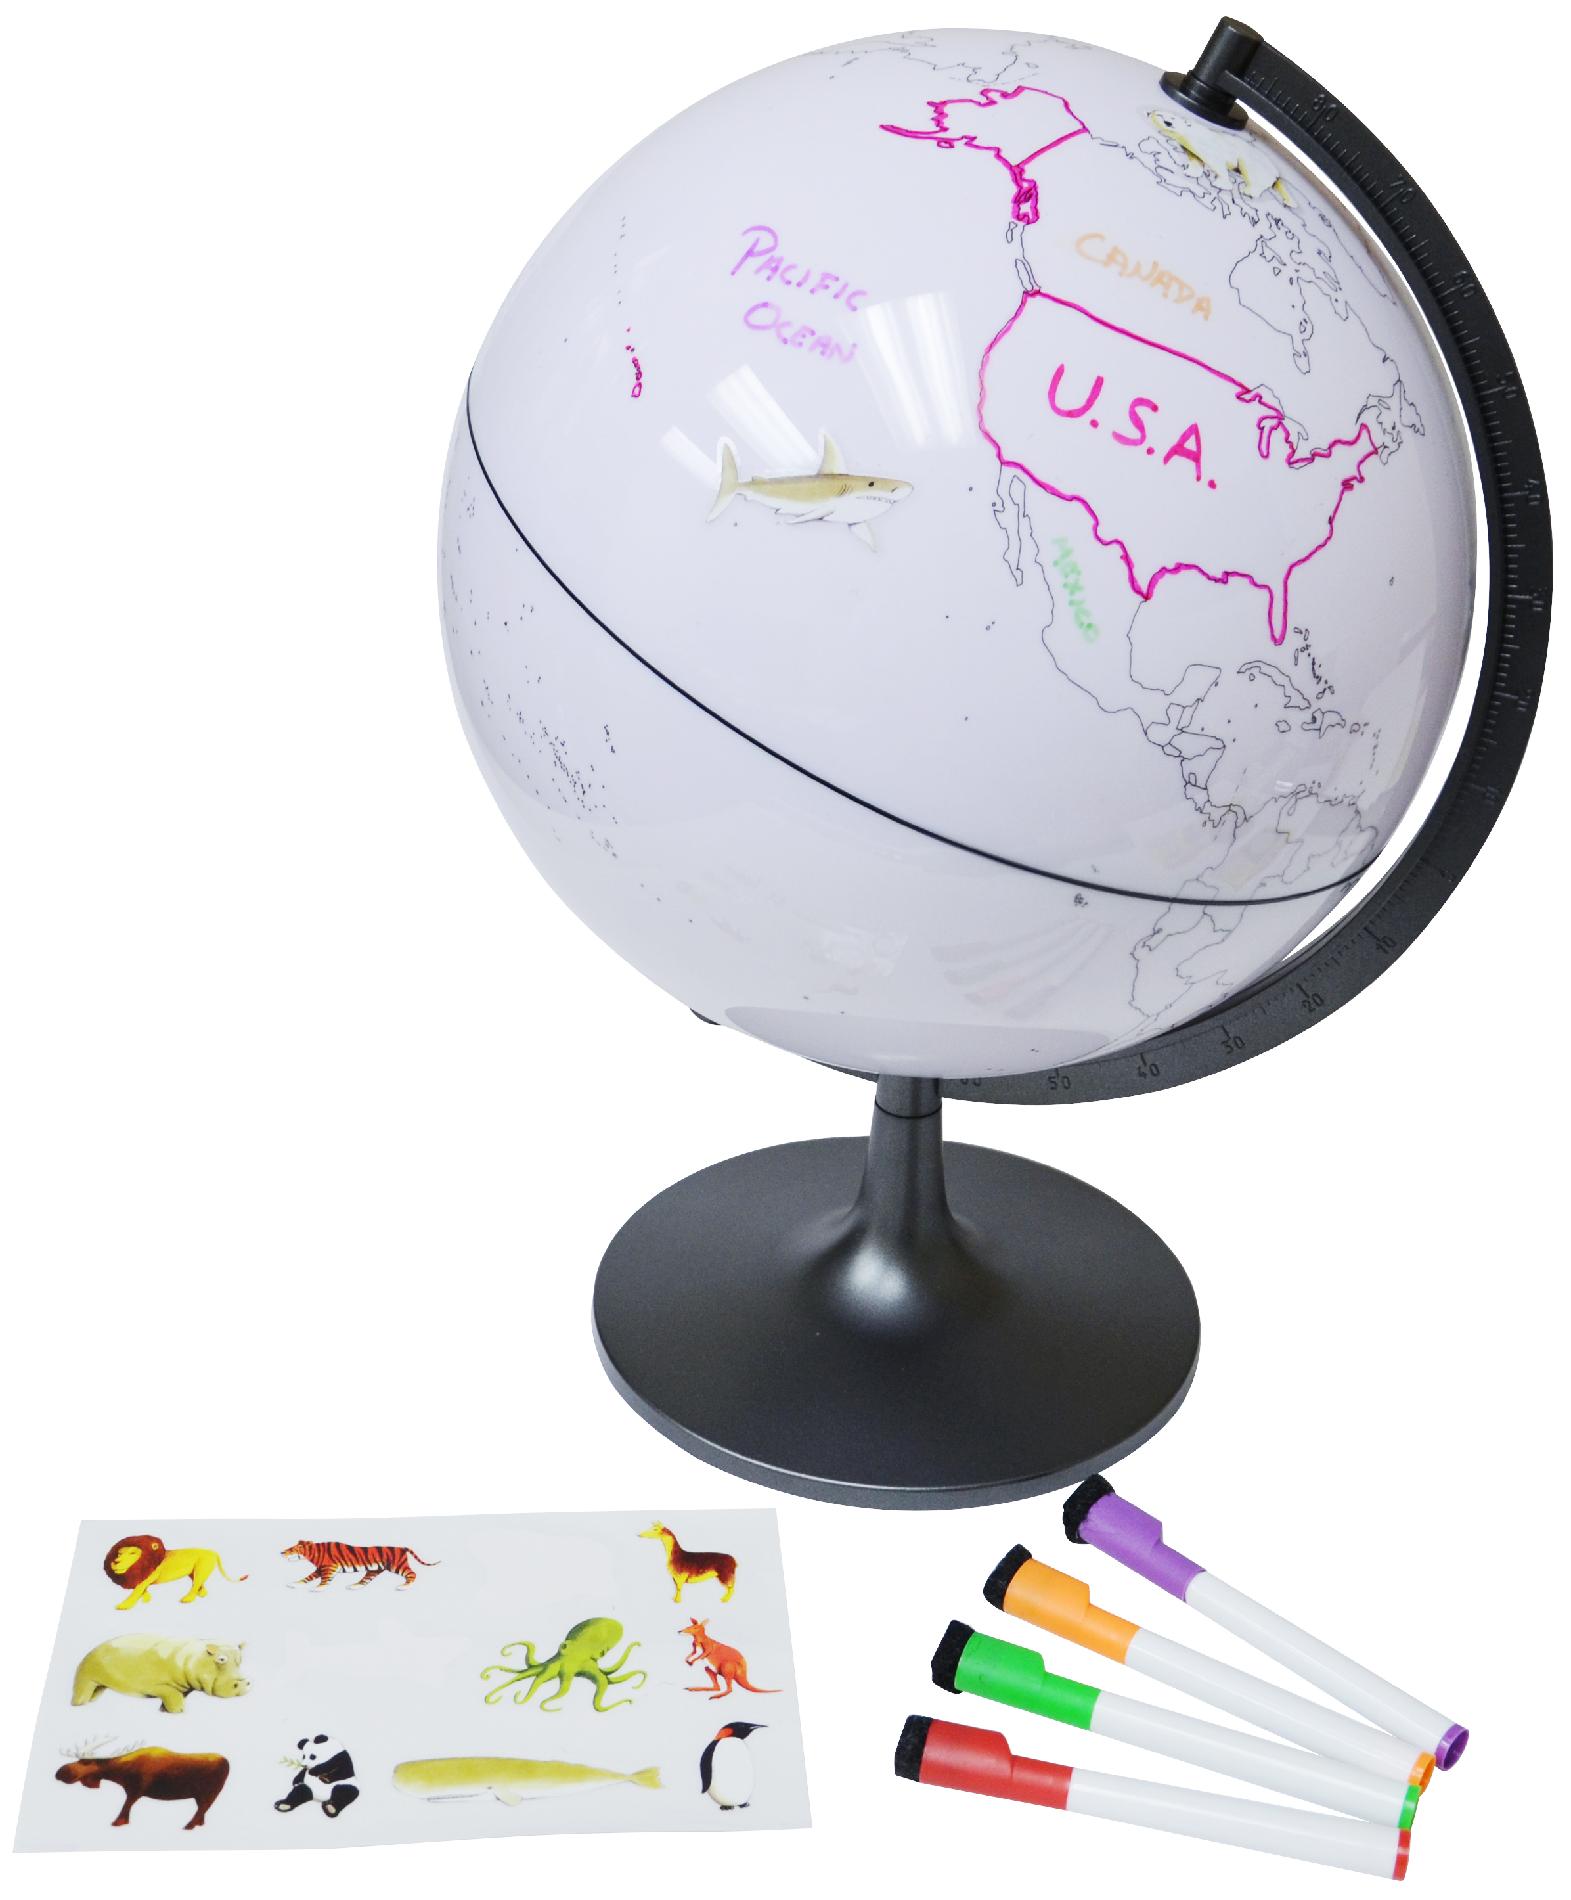 11" Color My World Globe with stickers